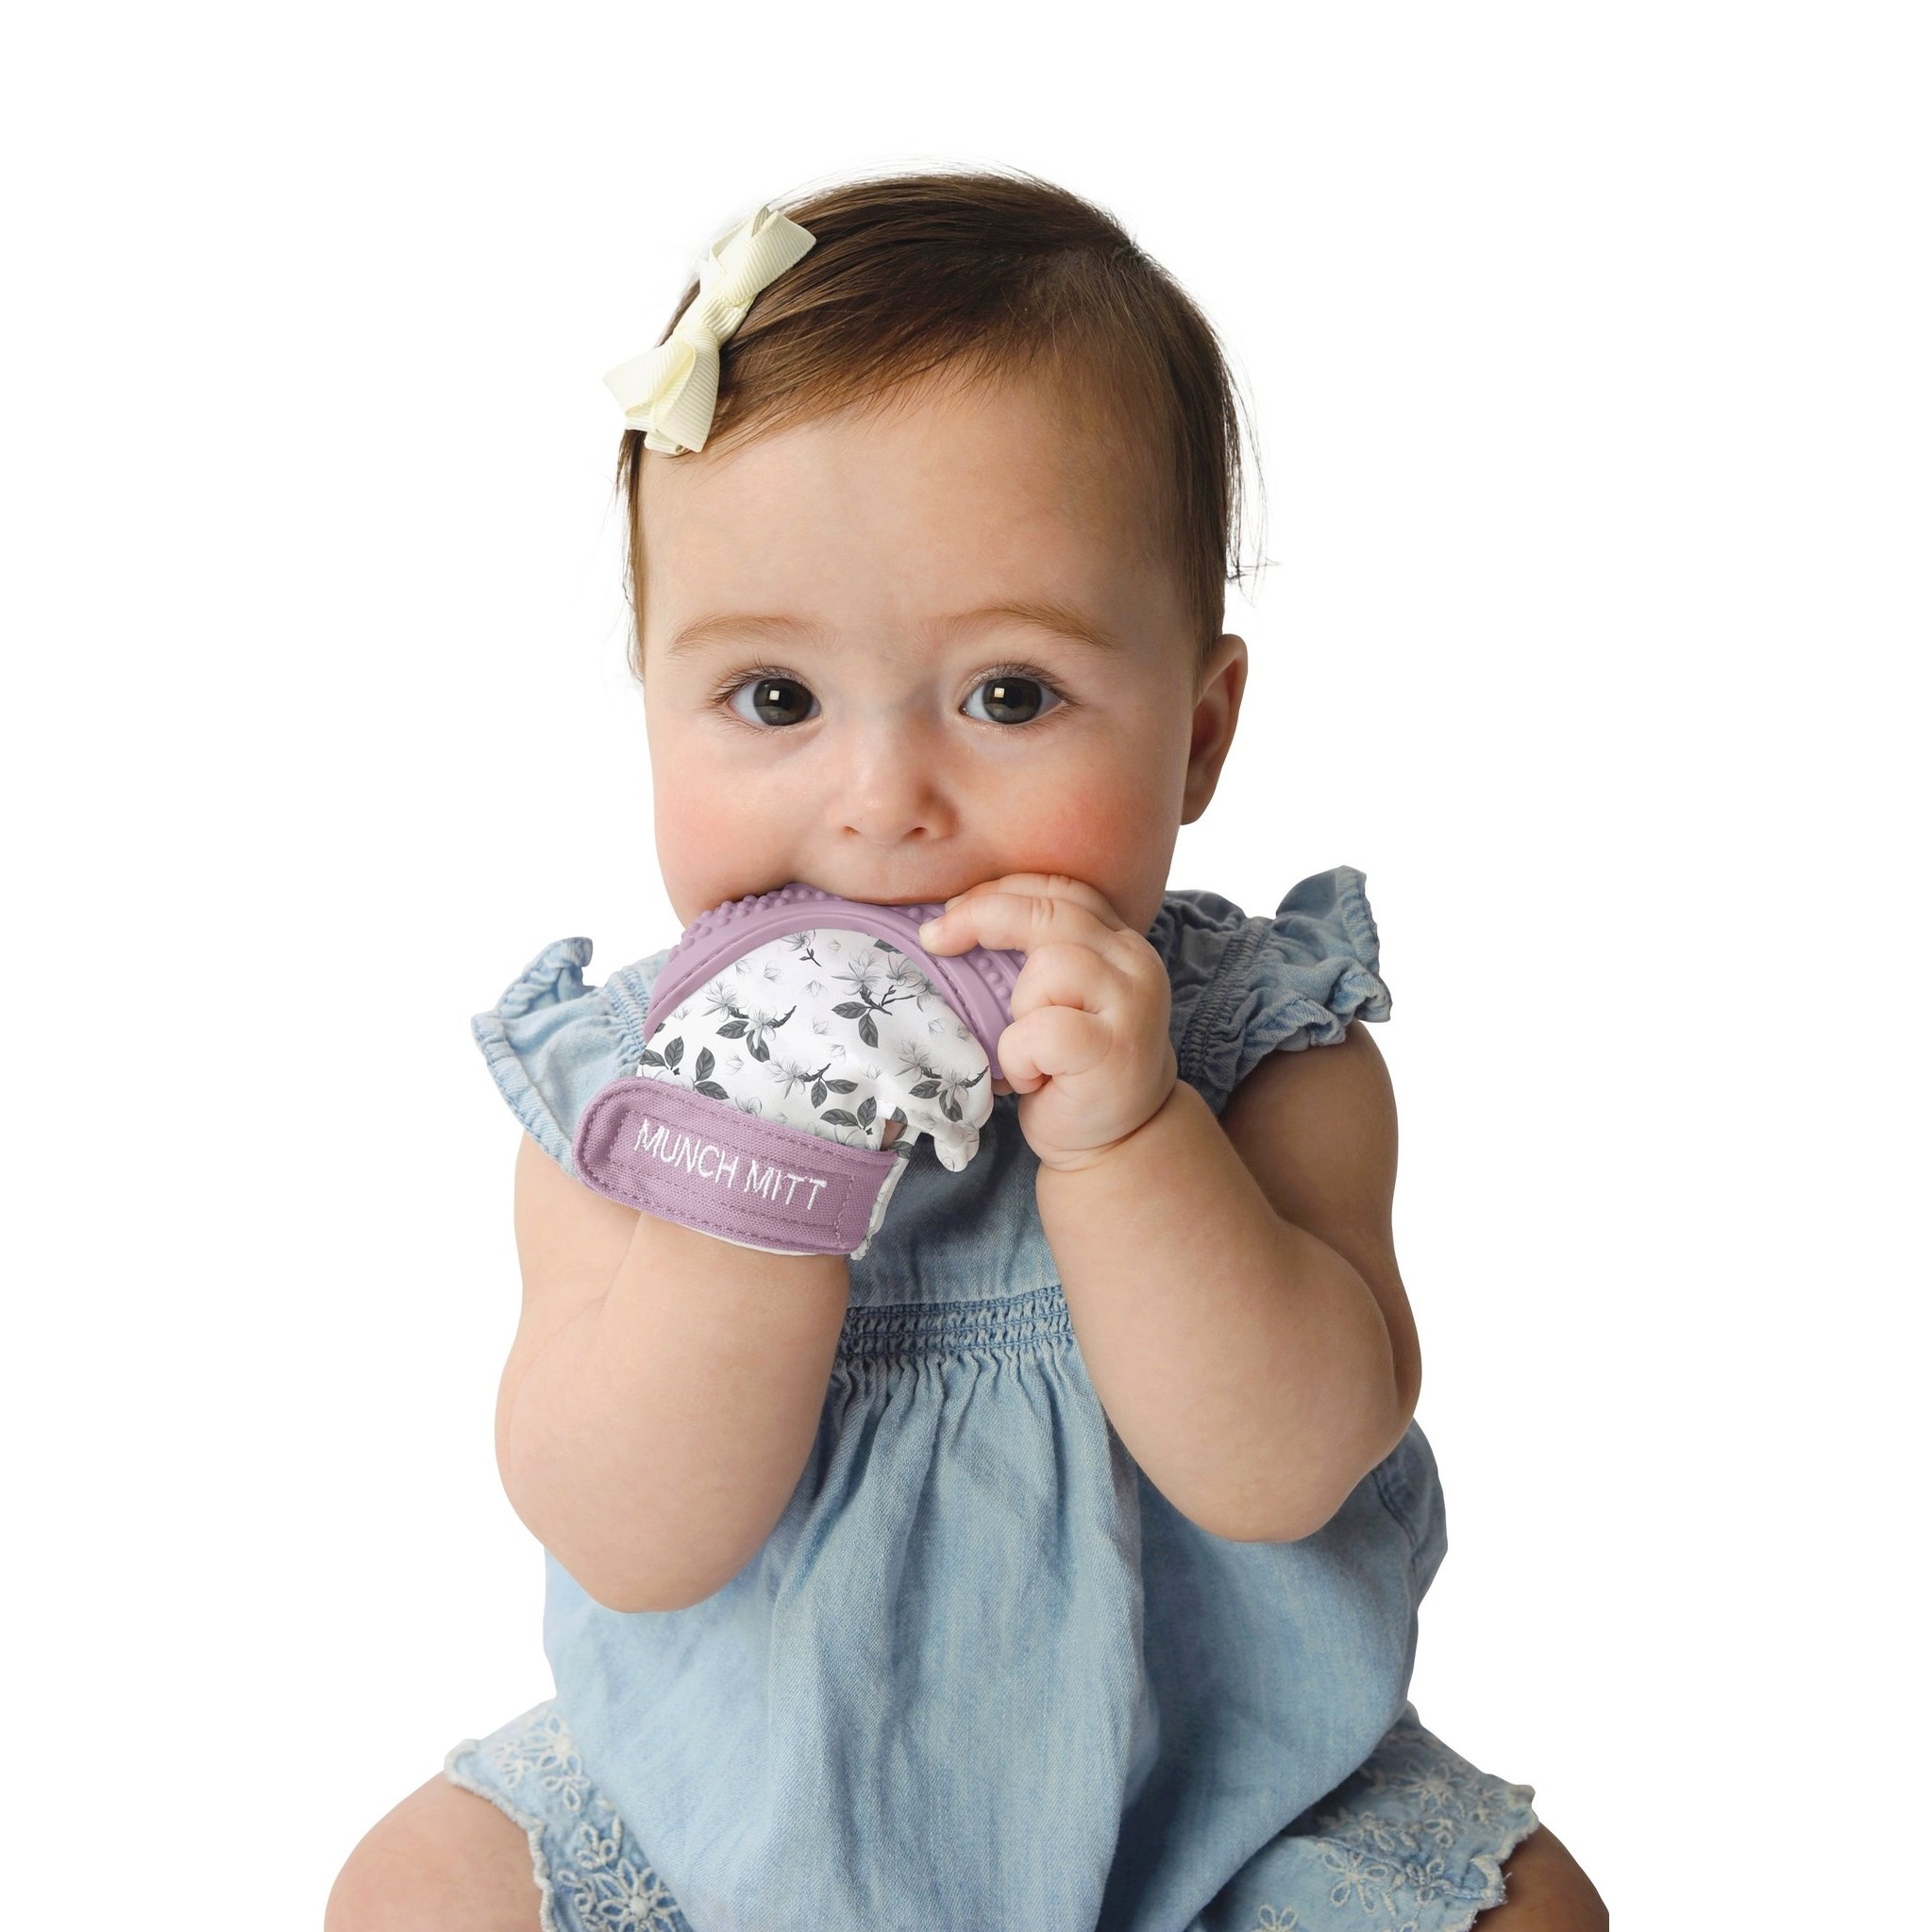 Protects Hands from Chewing & Saliva Night Forest Malarkey Kids Baby Teething Mitten Promotes Sound & Visual Stimulation for Babies Up to 1-Year-Old Heals Aching Gums Munch Mitt Baby Chew Toy